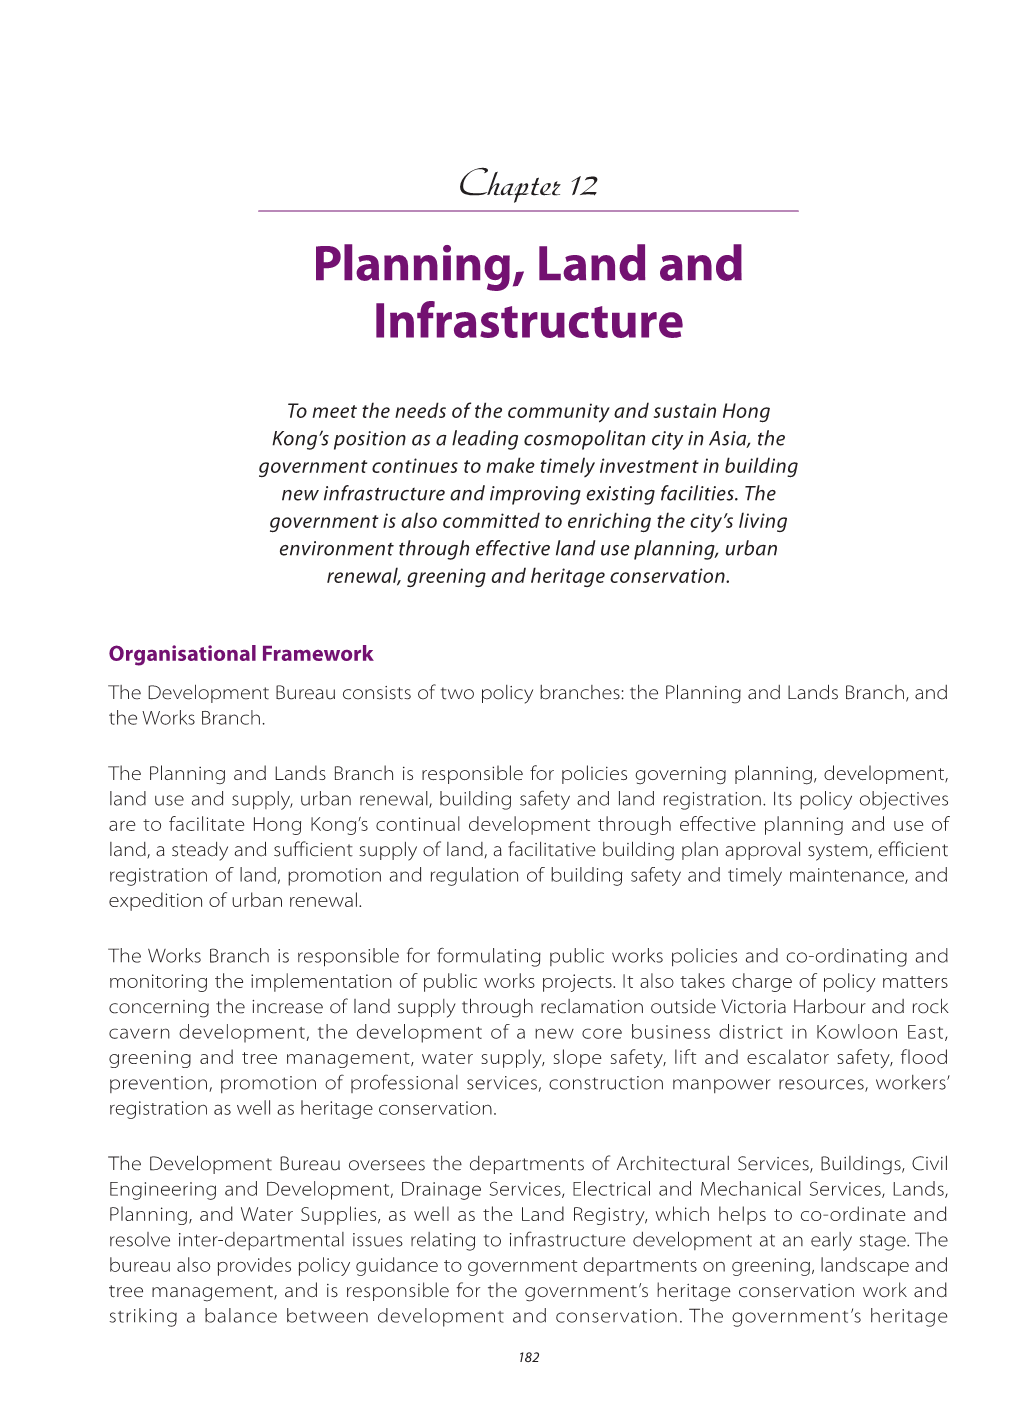 Planning, Land and Infrastructure